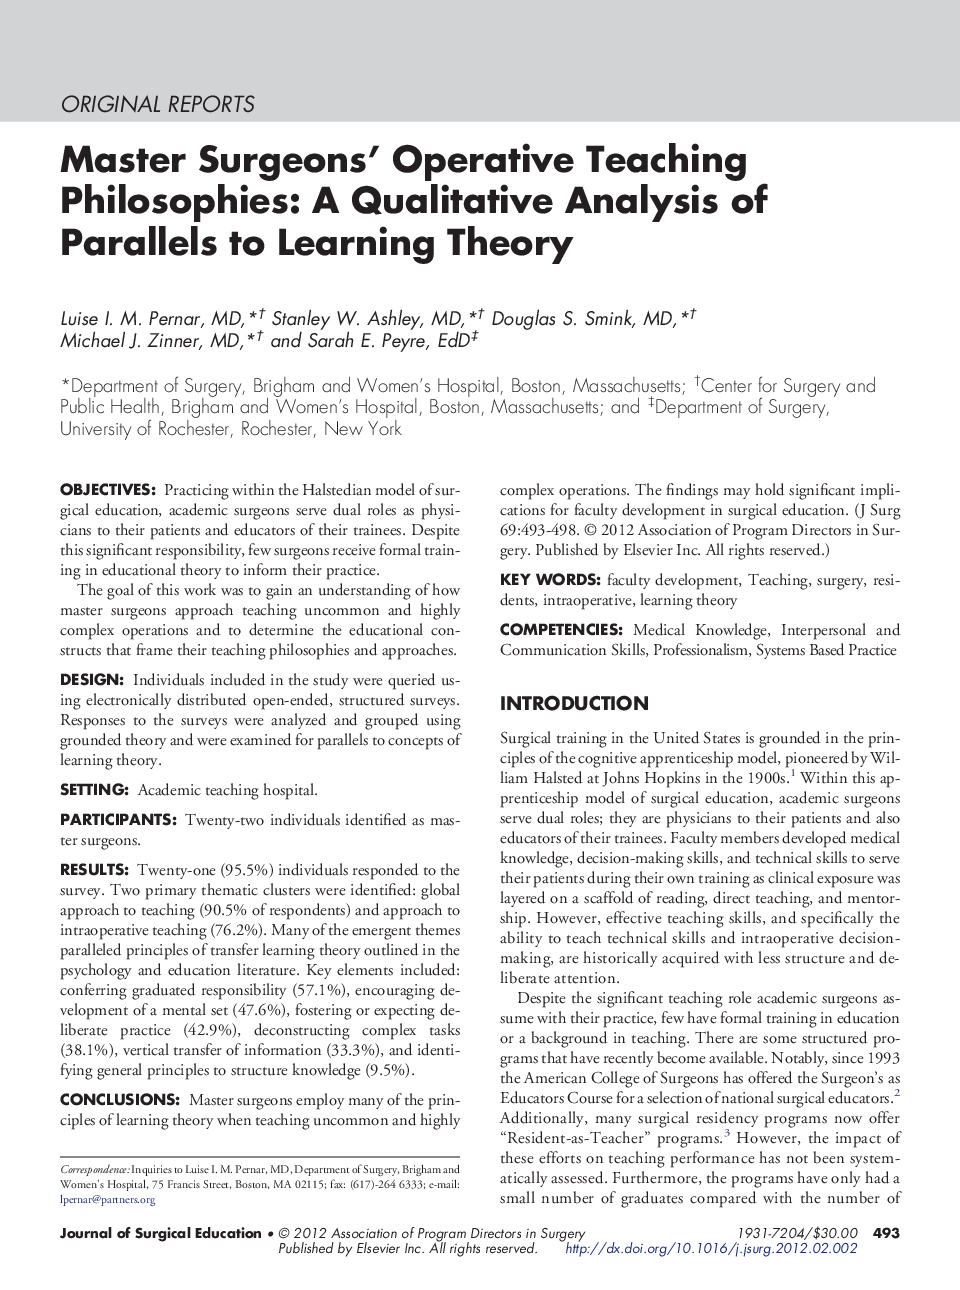 Master Surgeons' Operative Teaching Philosophies: A Qualitative Analysis of Parallels to Learning Theory